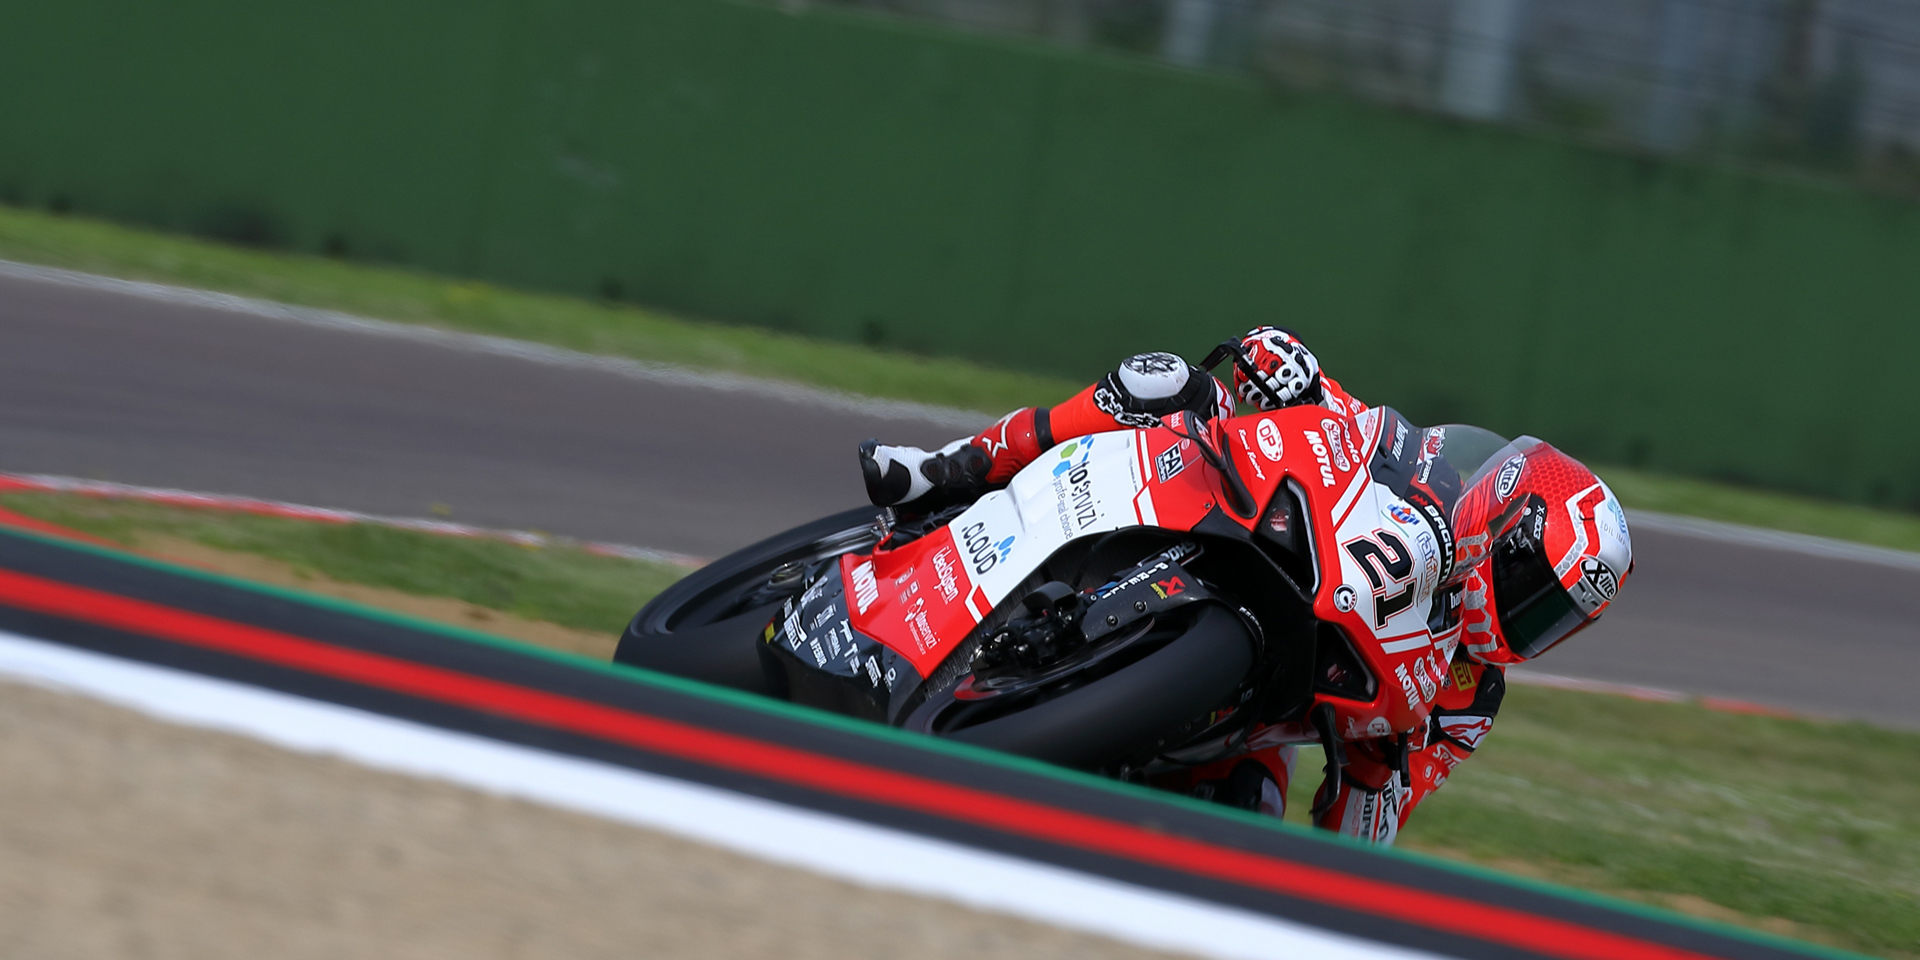 Rinaldi fifteenth in Superpole Race, race 2 cancelled at Imola